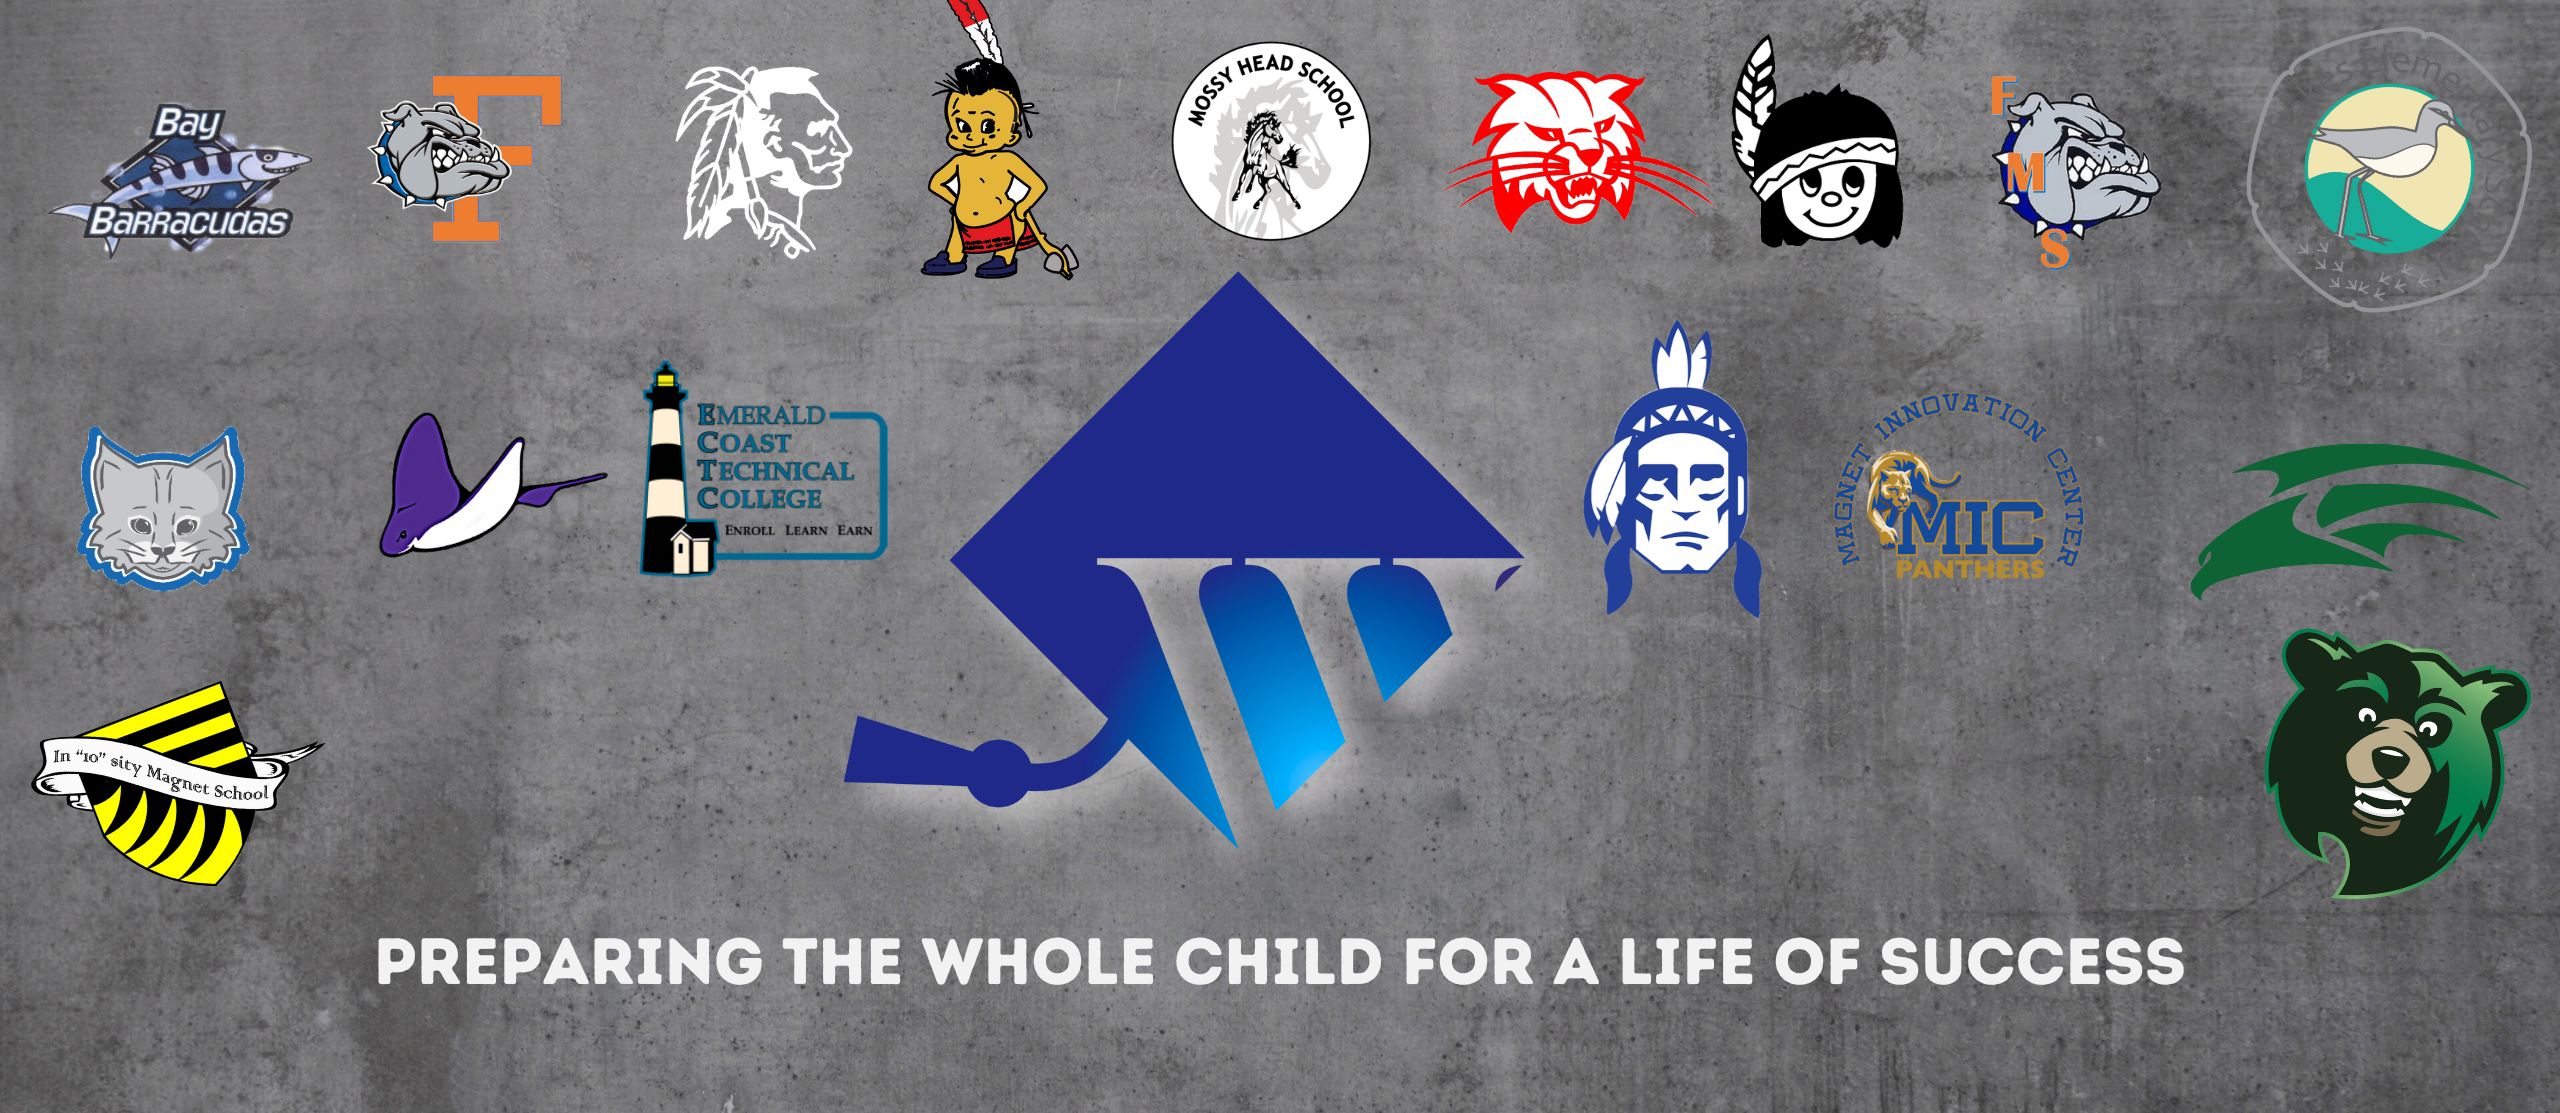 a collage of all the WCSD school logos with the text "Preparing the whole child for a life of success"